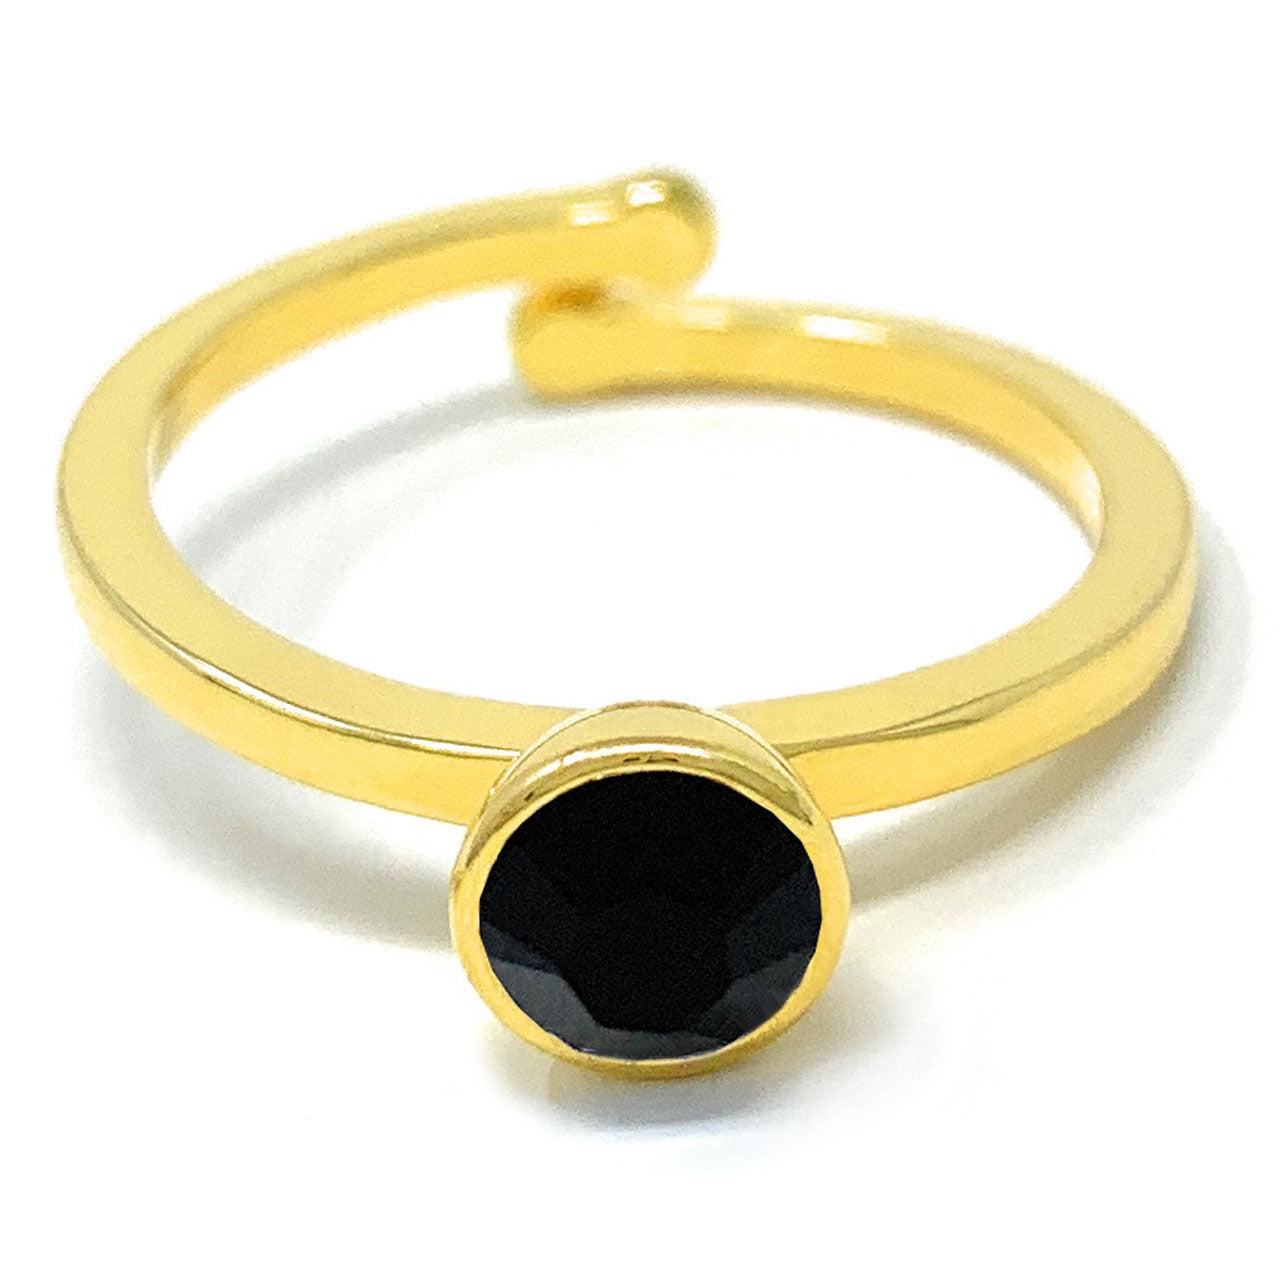 Harley Adjustable Ring with Black Jet Round Crystals from Swarovski Gold Plated - Ed Heart